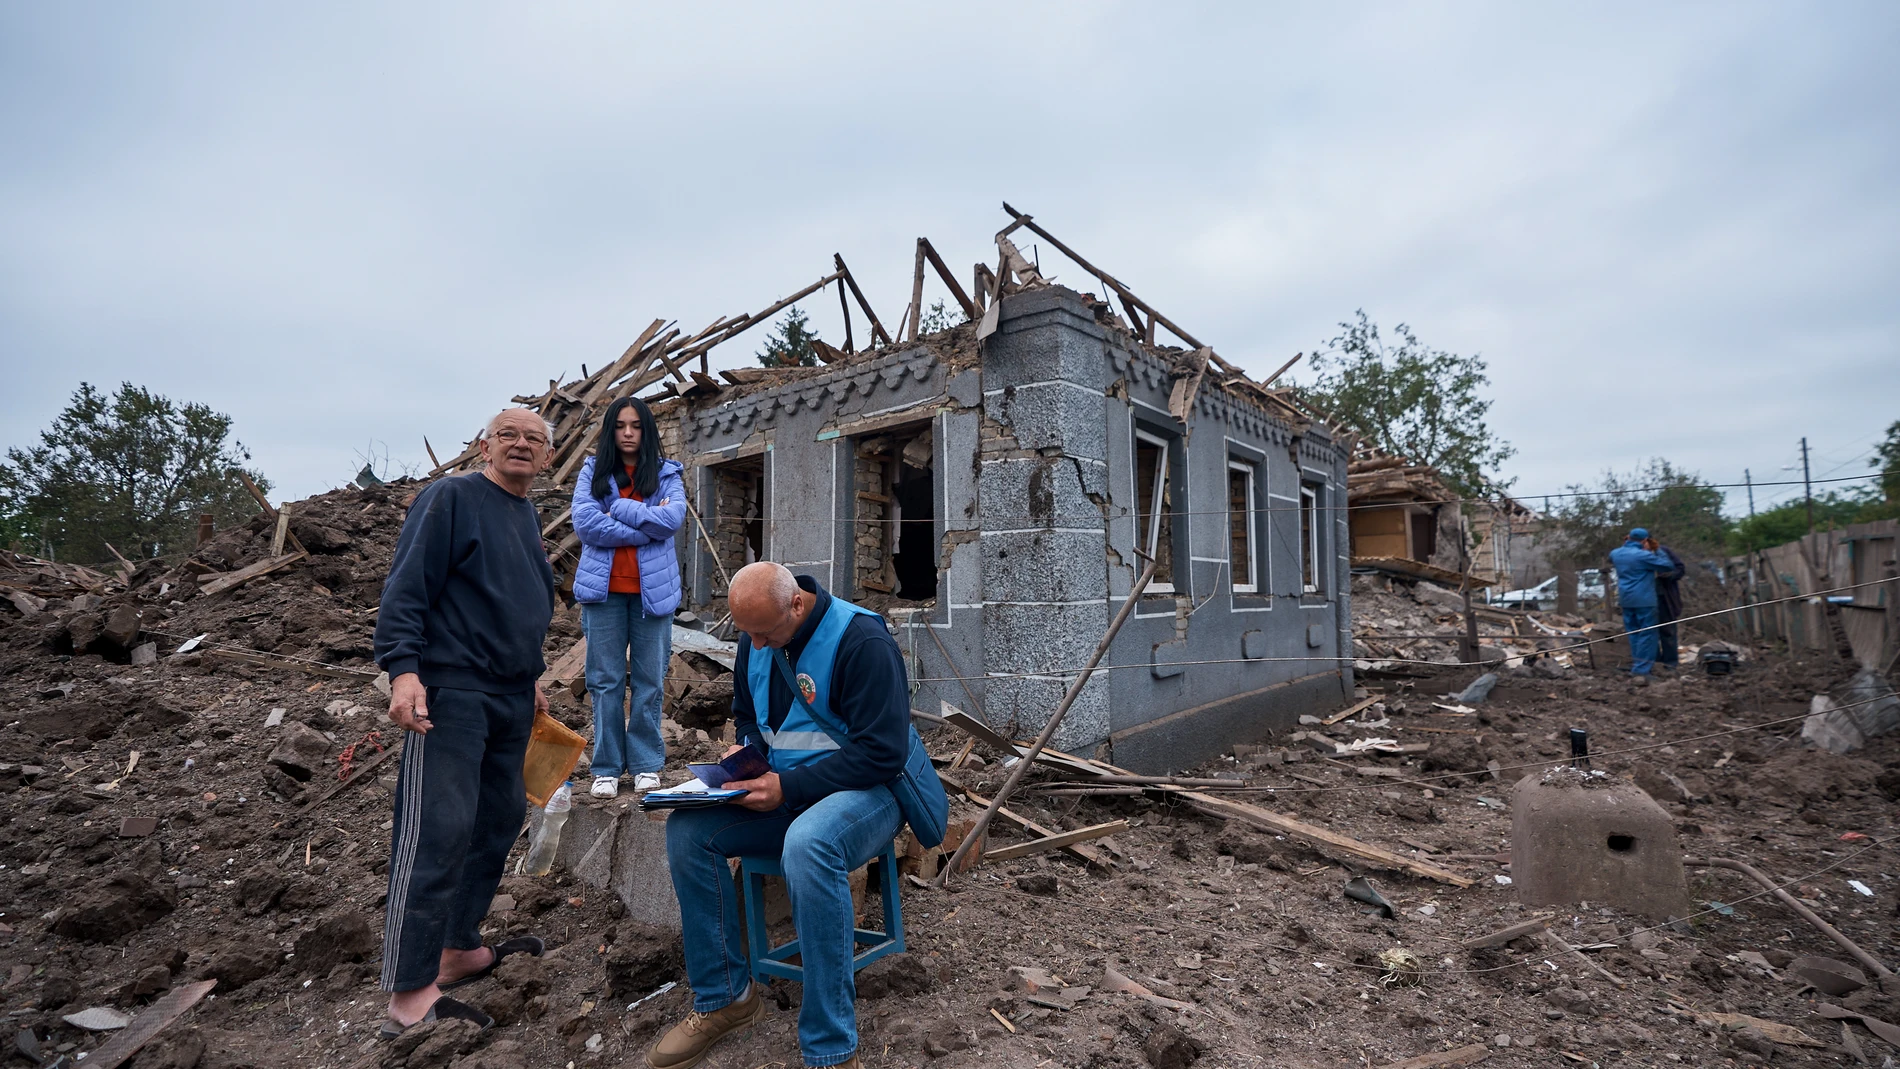 Kramatorsk (Ukraine), 14/06/2023.- Locals at the site of a damaged building after a missile strike in Kramatorsk, Donetsk region, eastern Ukraine, 14 June 2023, amid the Russian invasion. At least two people were killed and two others injured after a missile attack on Kramatorsk, the head of the civil administration of Donetsk region, Pavlo Kyrylenko reported. In Kostyantynivka, one person died and another was injured as a result of a rocket attack, Kyrylenko added. Russian troops entered Ukr...